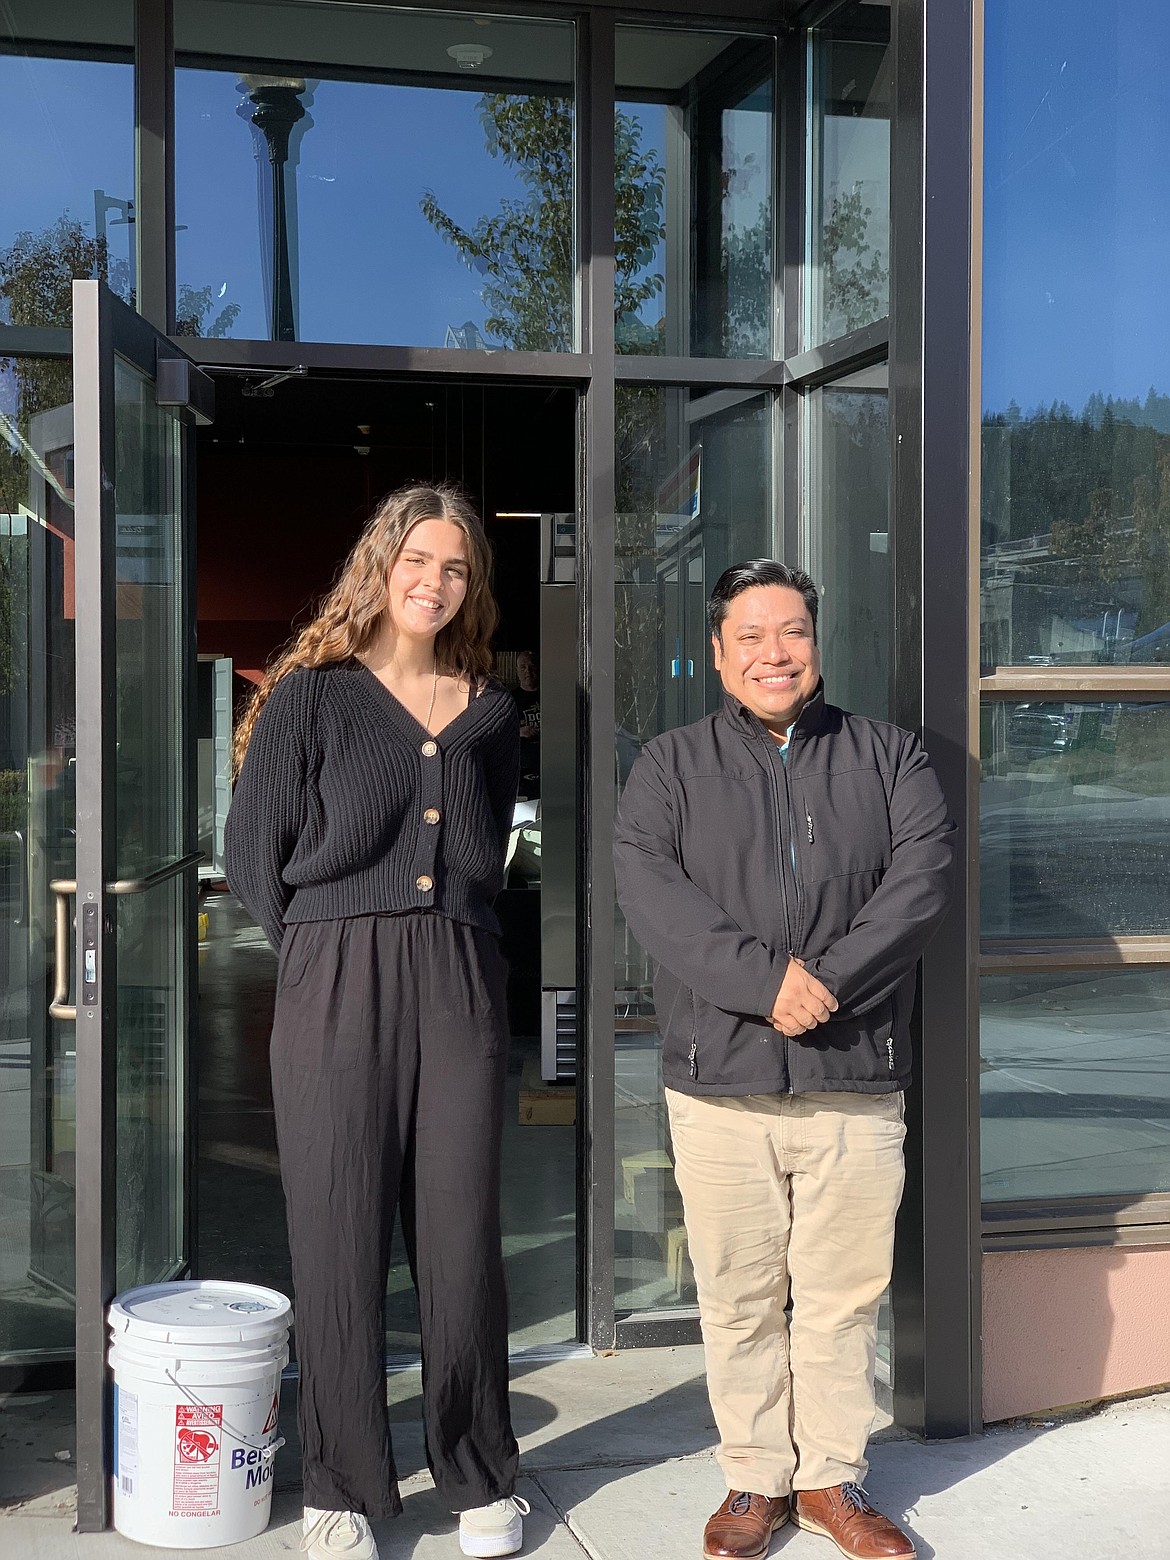 Lexi Zenk and general manager Brent Reuer stand outside the Point Market.